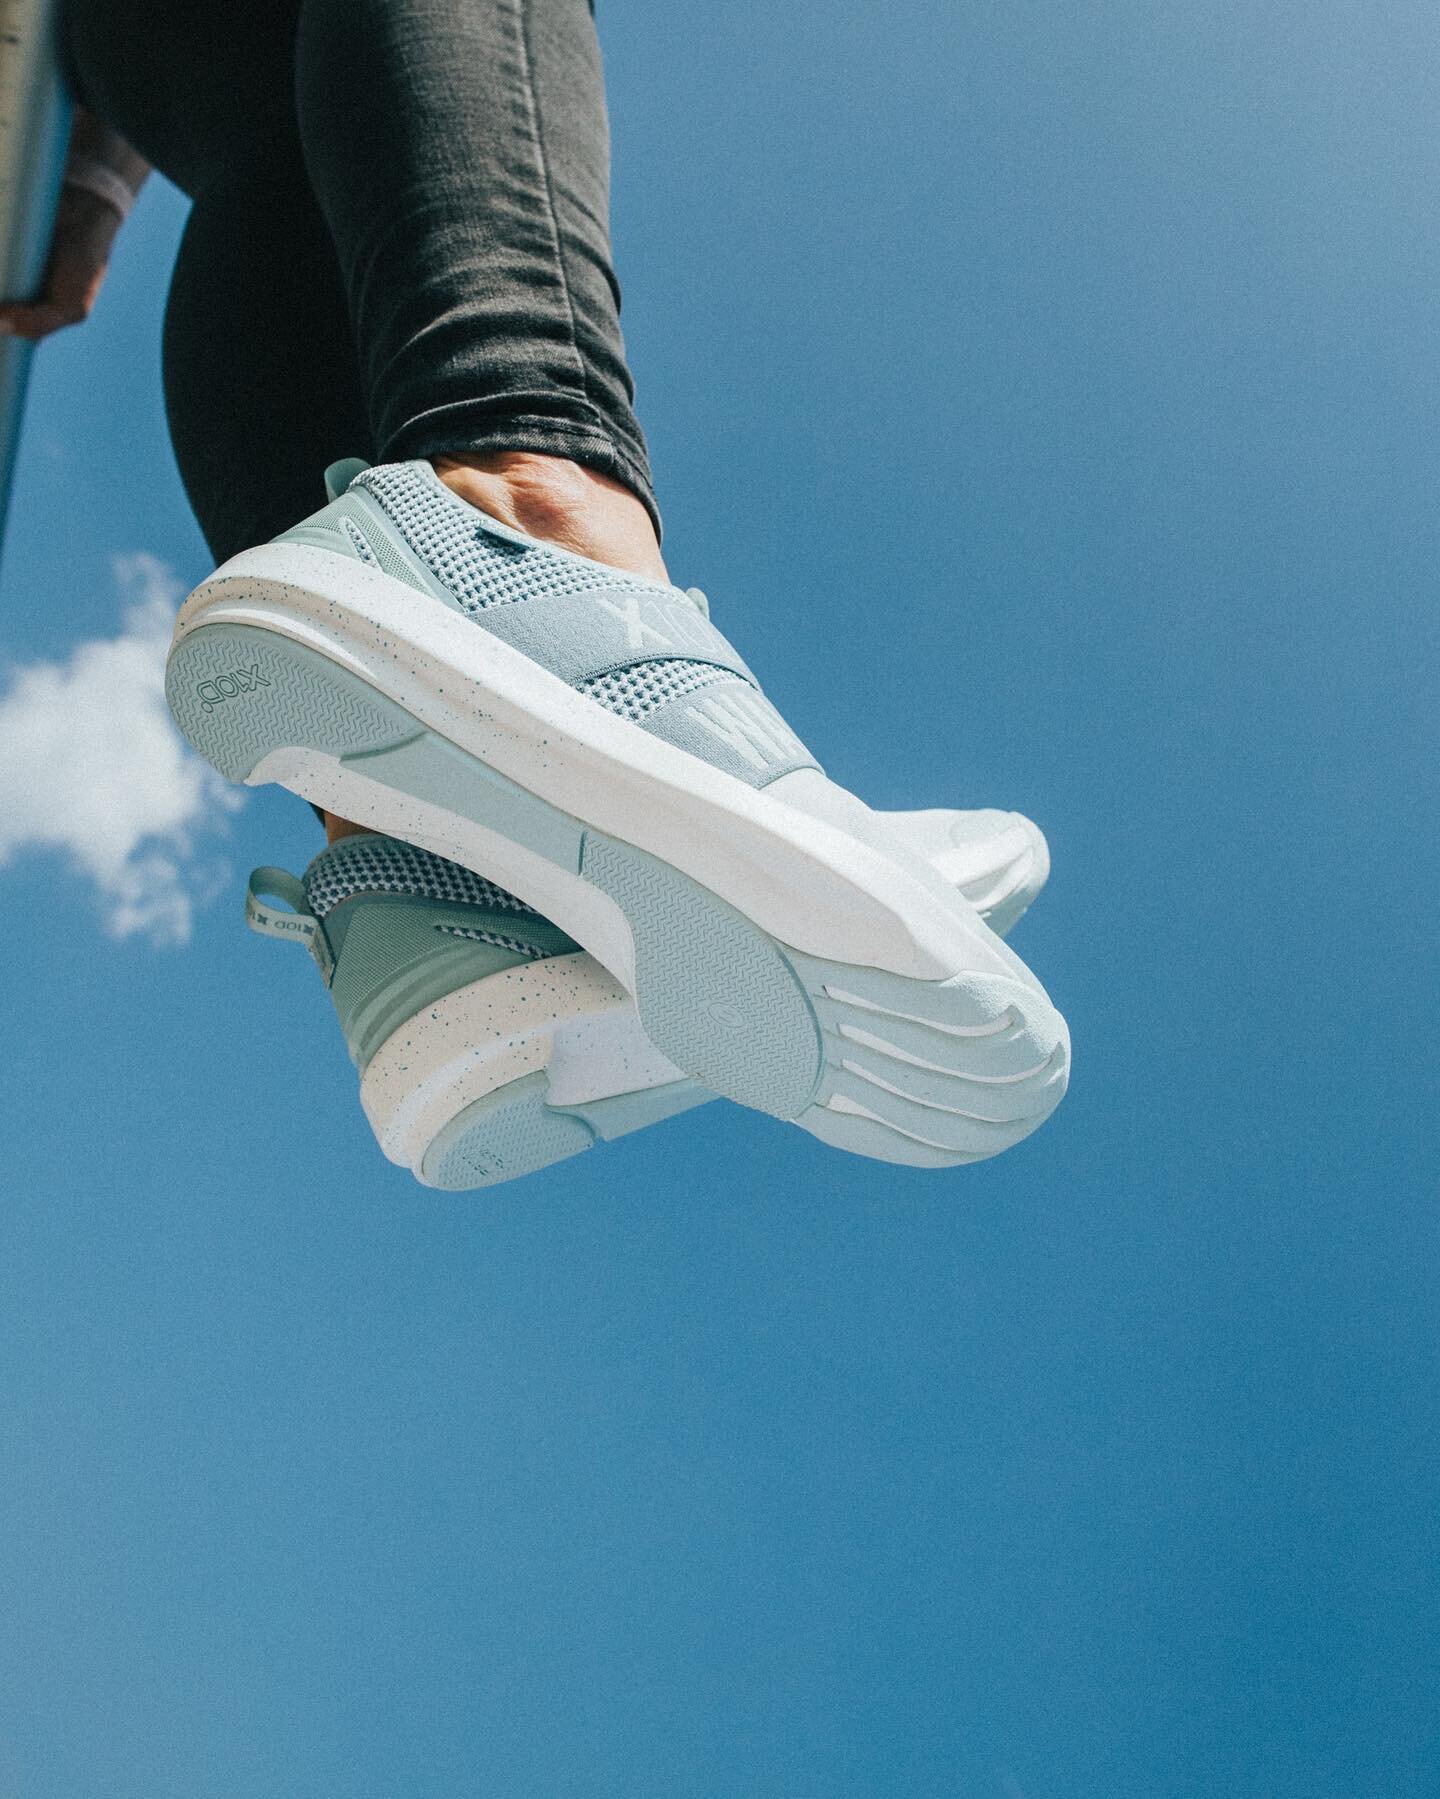 Our new spring color - SKY 🔵☀️ These shoes are made for walking - show your footprint 👣👋🏻

#x10d #WalkTheLine #TheLinewalker #shoe #shoes #swisstechnology #swissengineering #swiss #stayhealthy #mindfulness #optimiseyourwalk #shoess #footwear #sty